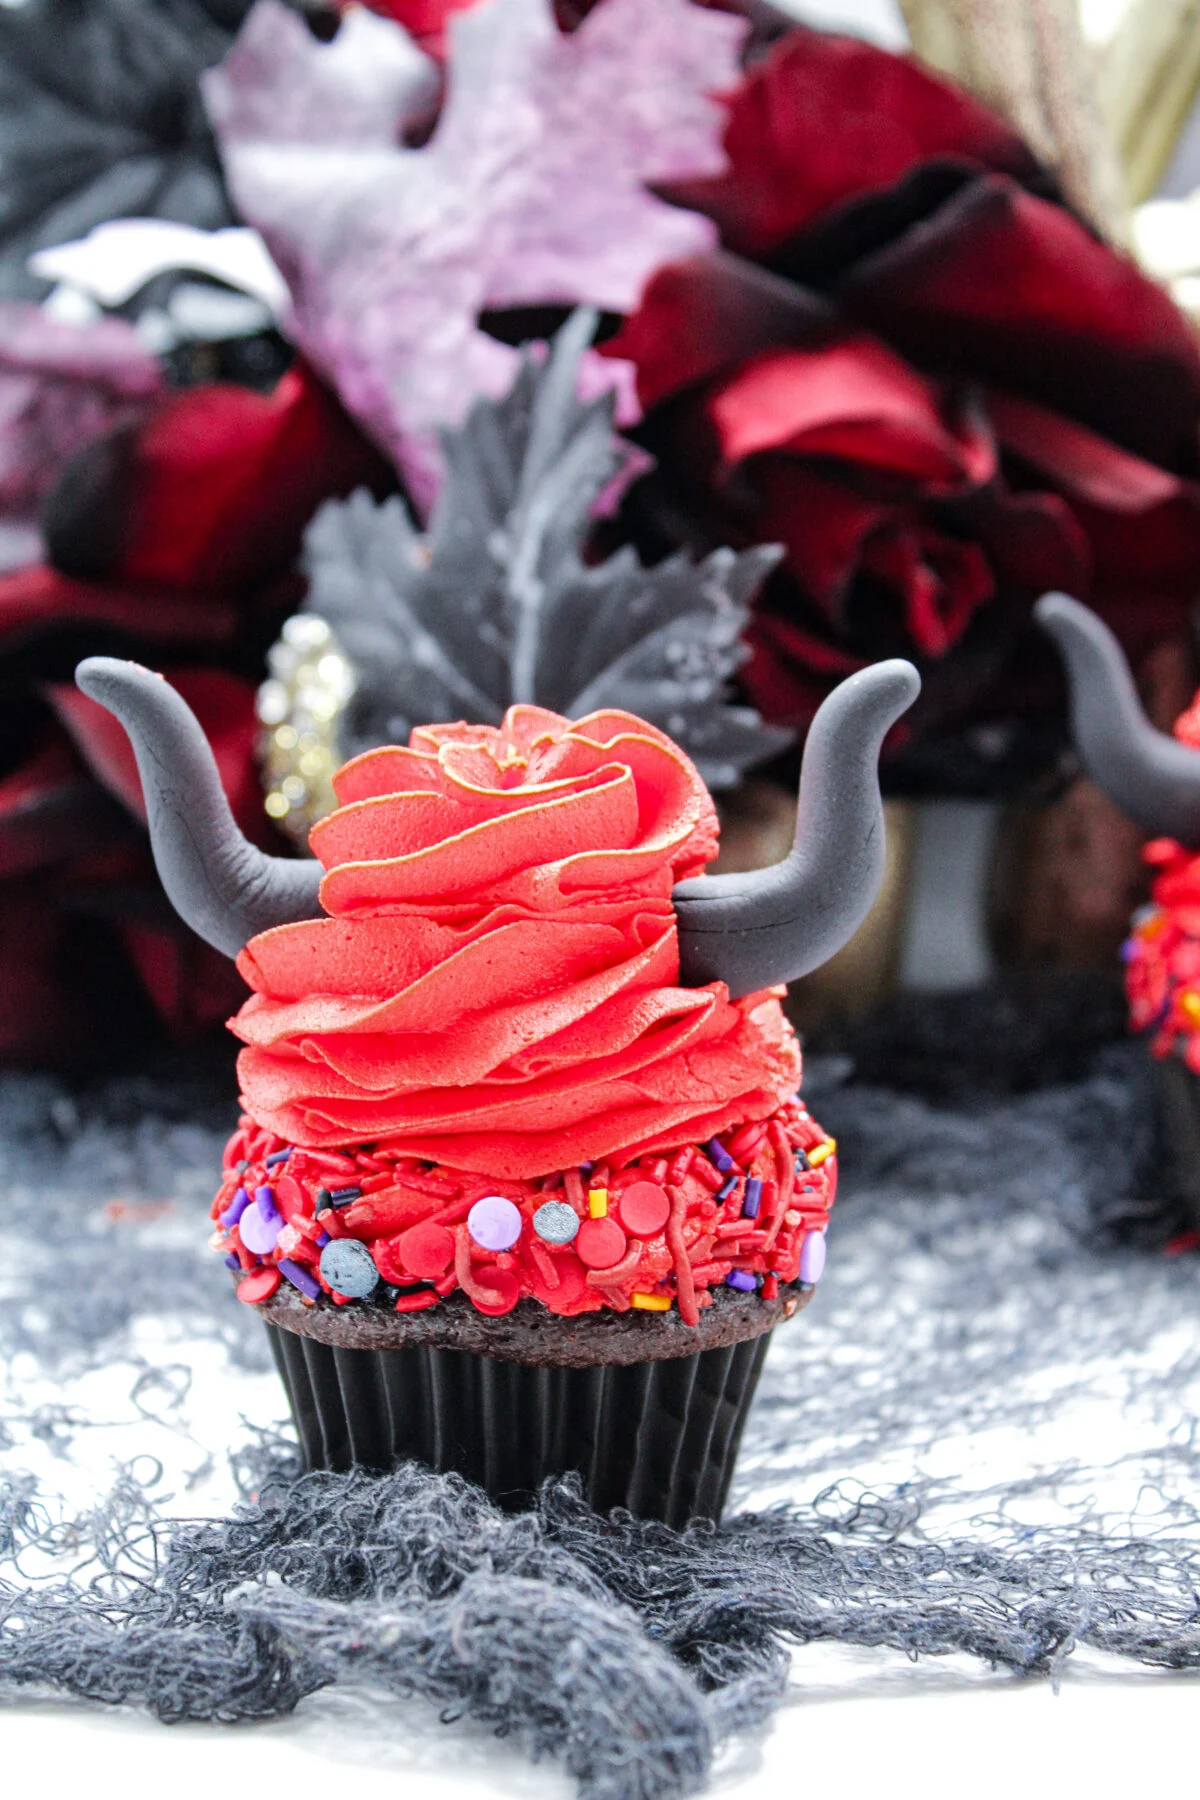 Get into the spirit of Halloween with this wickedly delicious recipe! Spooky and sweet, these devil cupakes will be a hit for Halloween.